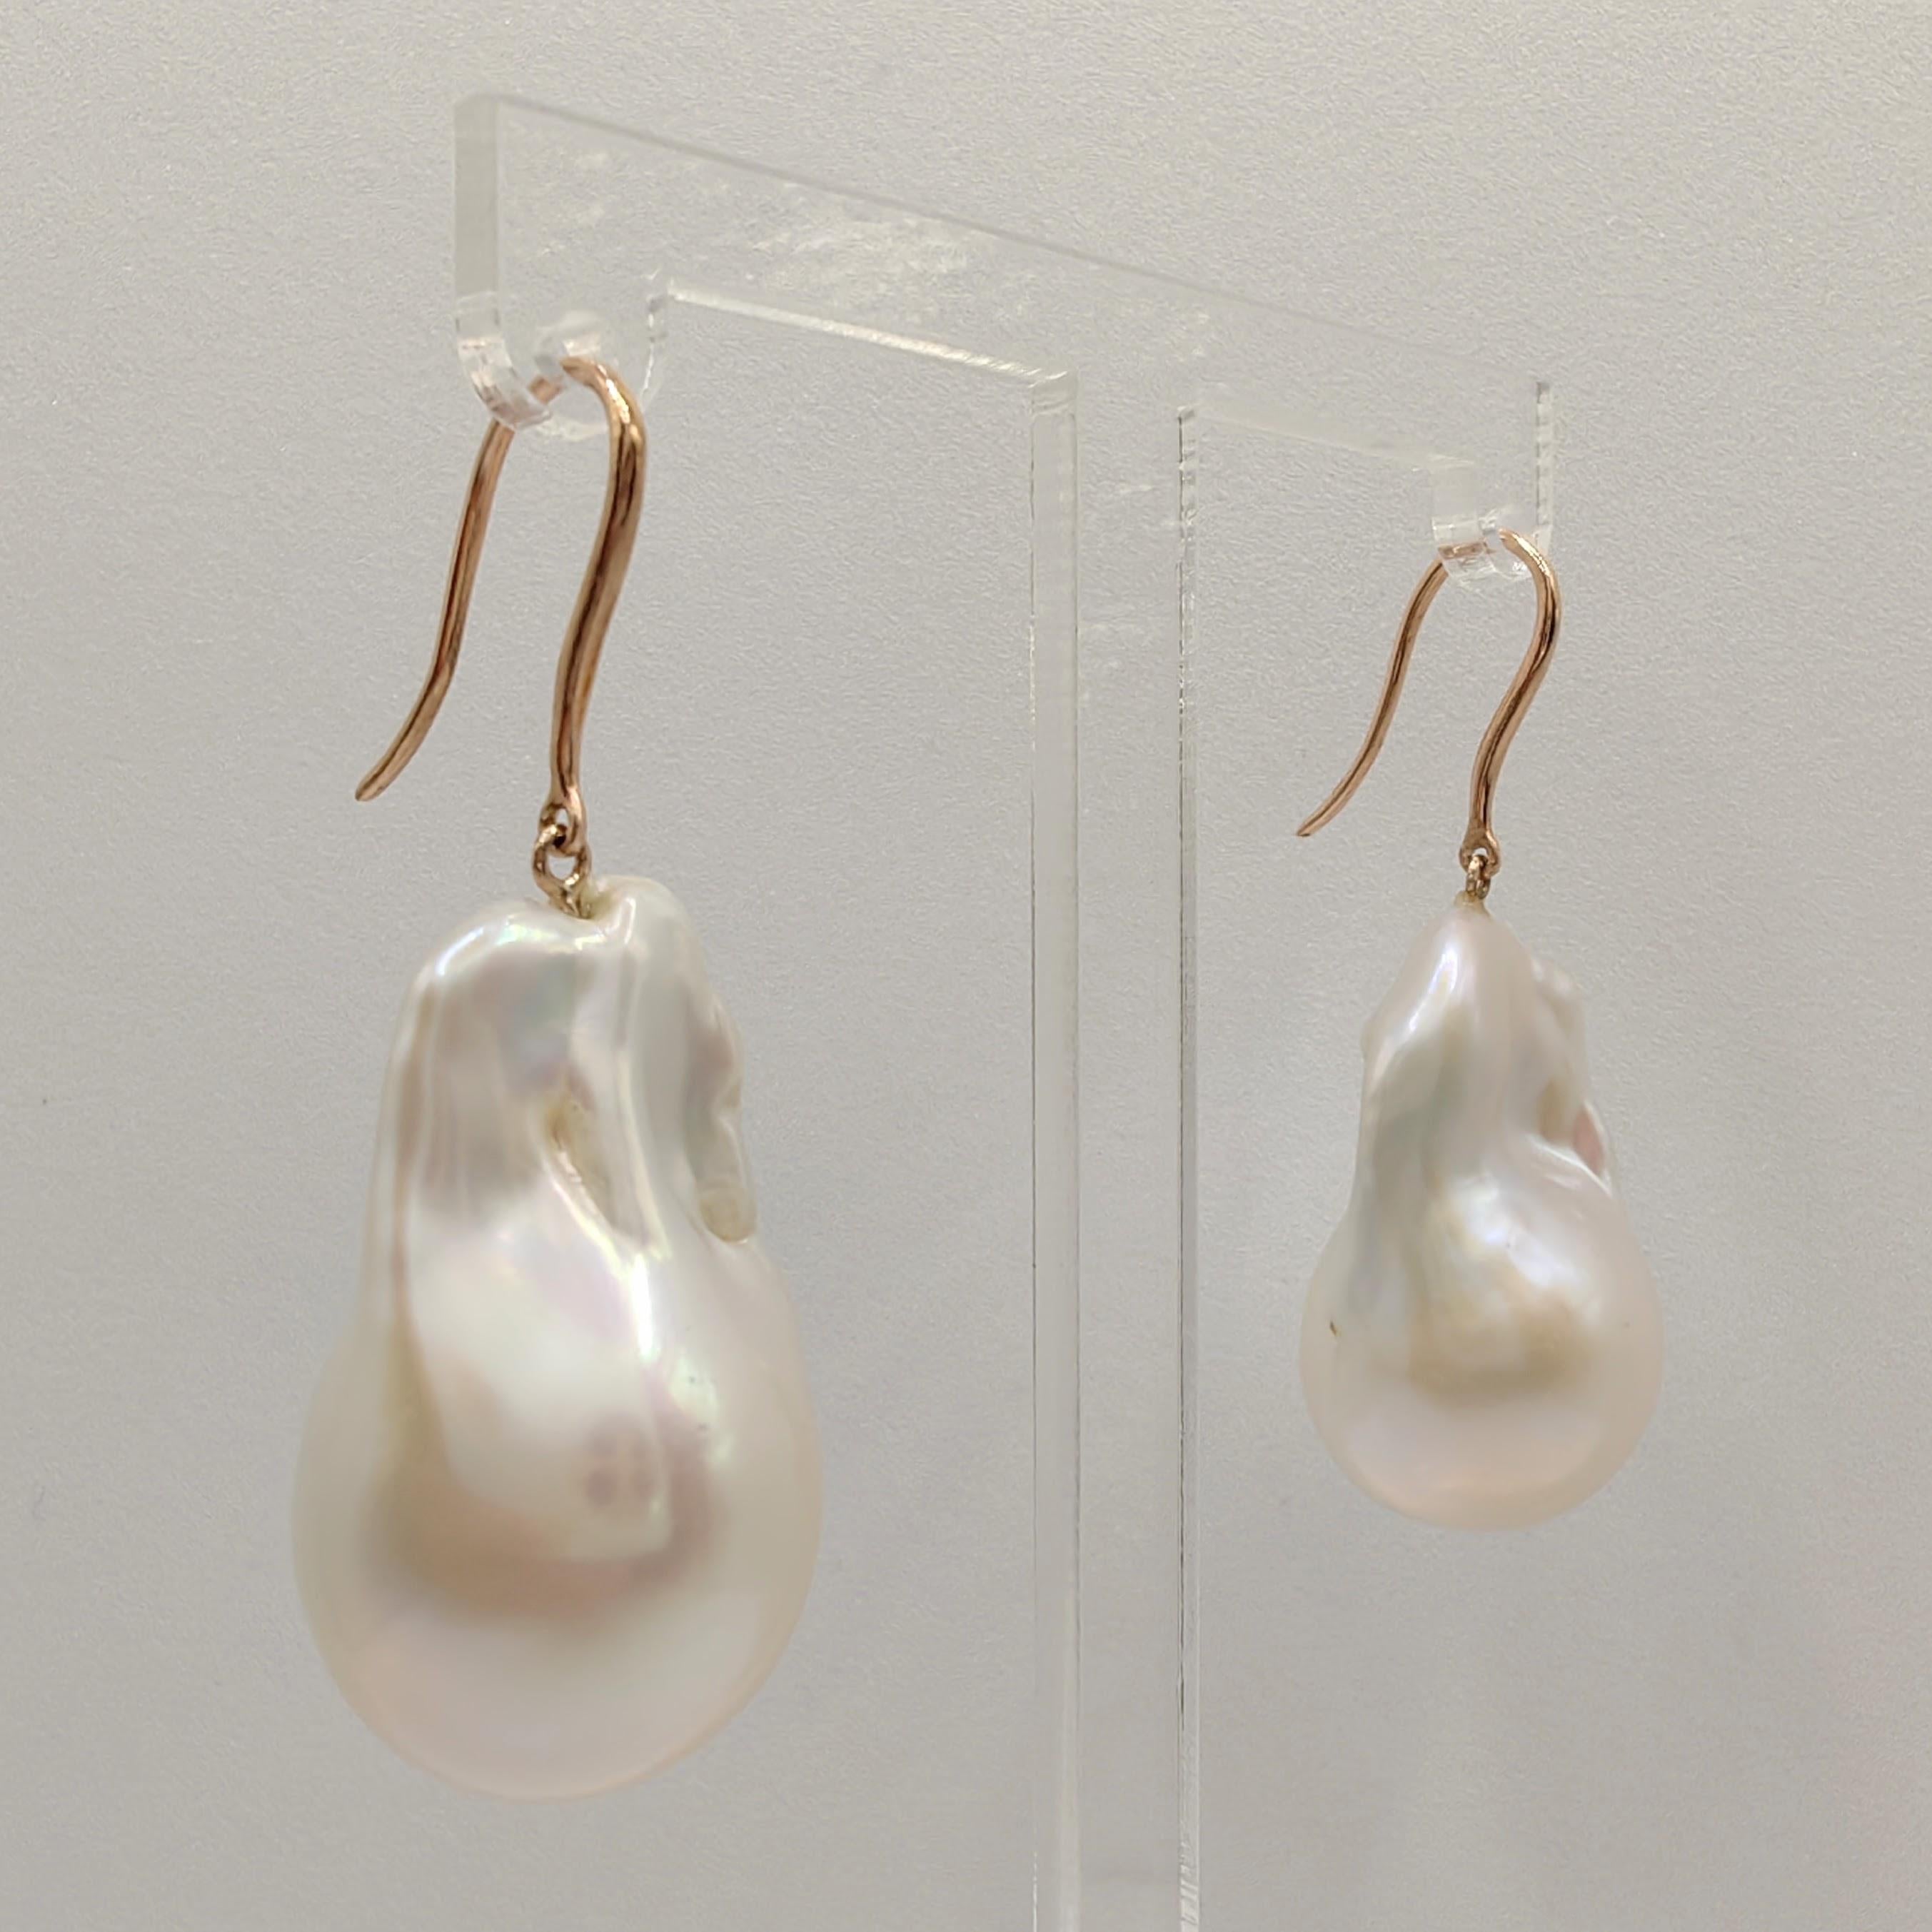 Uncut Large Baroque Pearl Dangling Drop Earrings With 18K Rose Gold French Hooks